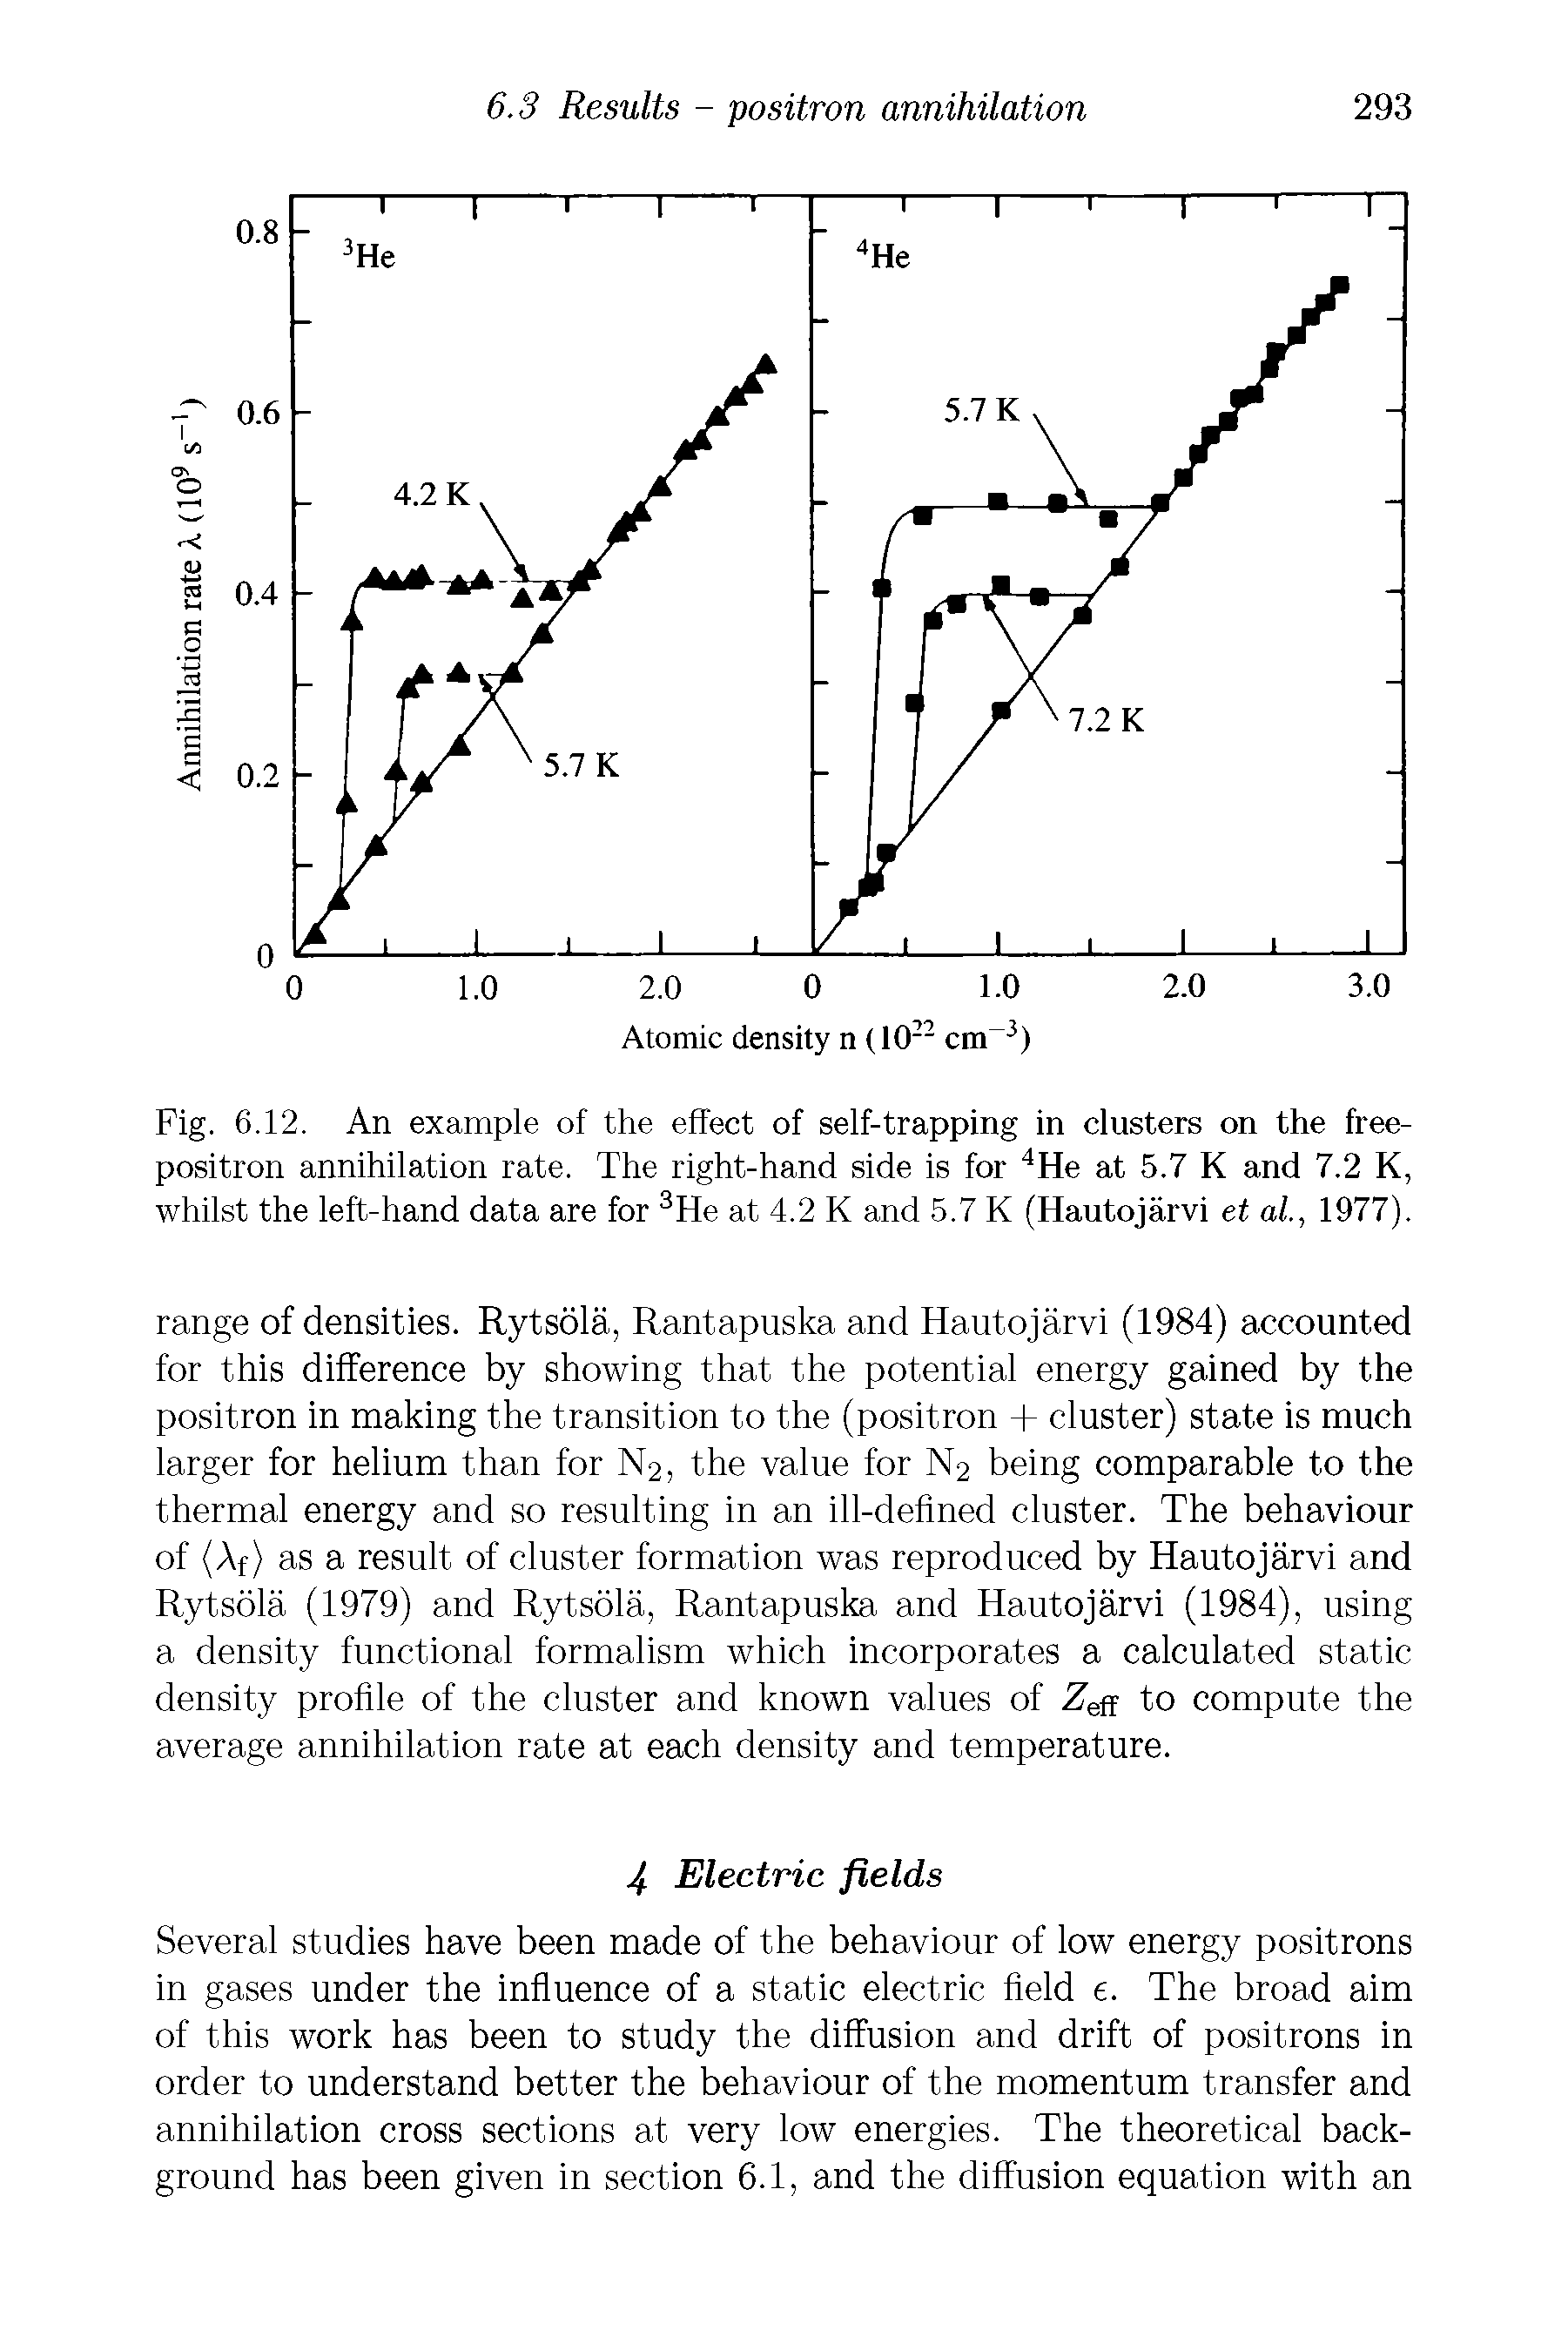 Fig. 6.12. An example of the effect of self-trapping in clusters on the free-positron annihilation rate. The right-hand side is for 4He at 5.7 K and 7.2 K, whilst the left-hand data are for 3He at 4.2 K and 5.7 K (Hautojarvi et al, 1977).